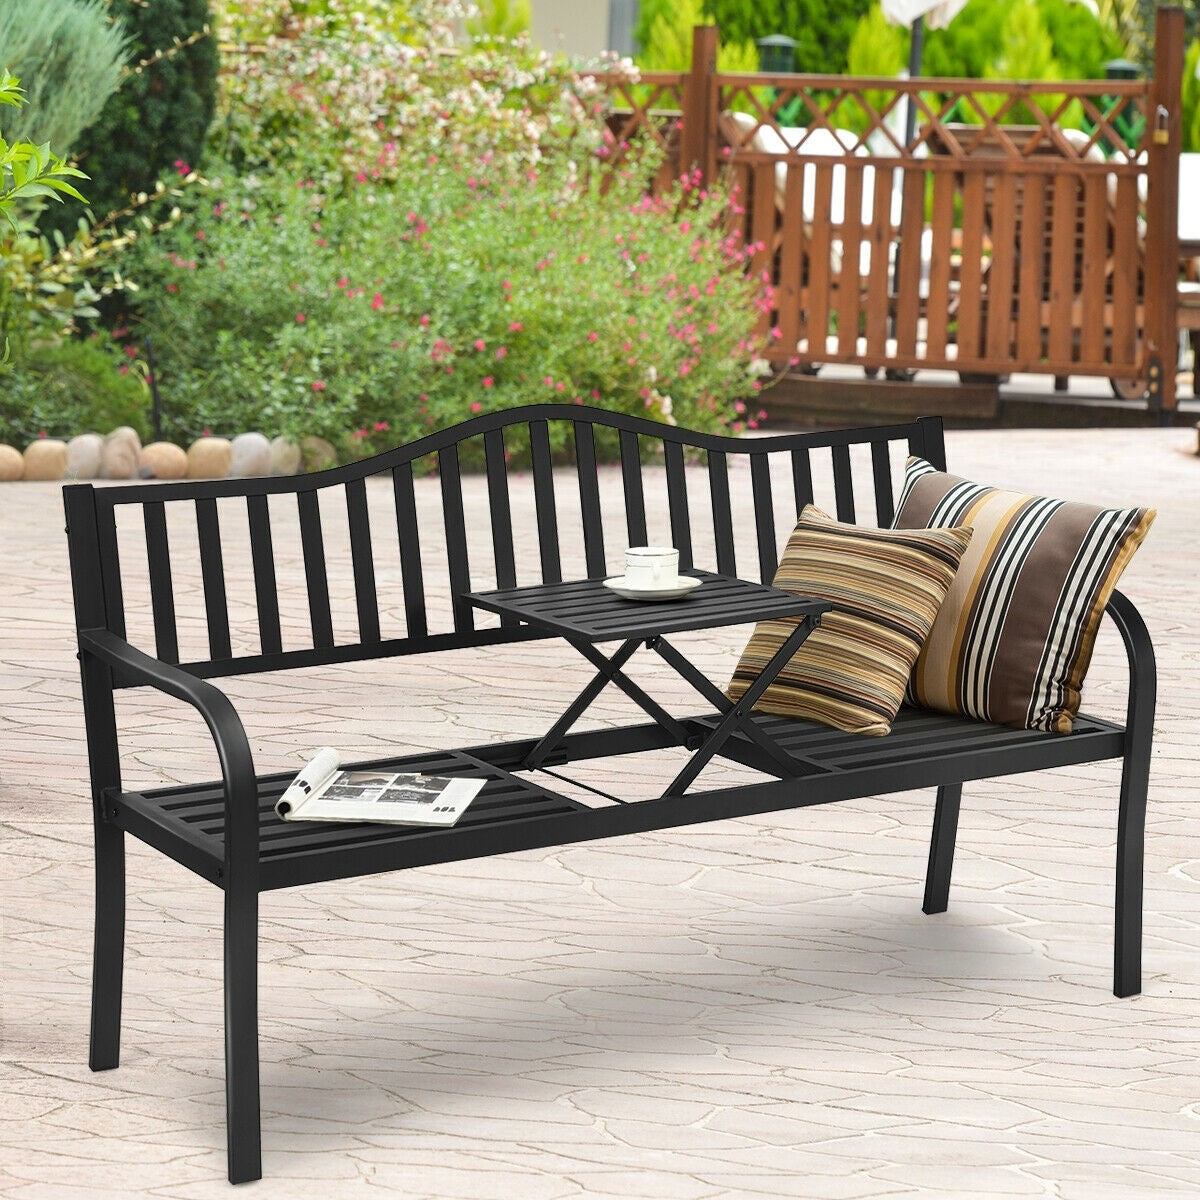 Giantex Patio Bench w/ Pullout Middle Table, Outdoor Benches2-3 Person, Metal Benches for Outside (Black)